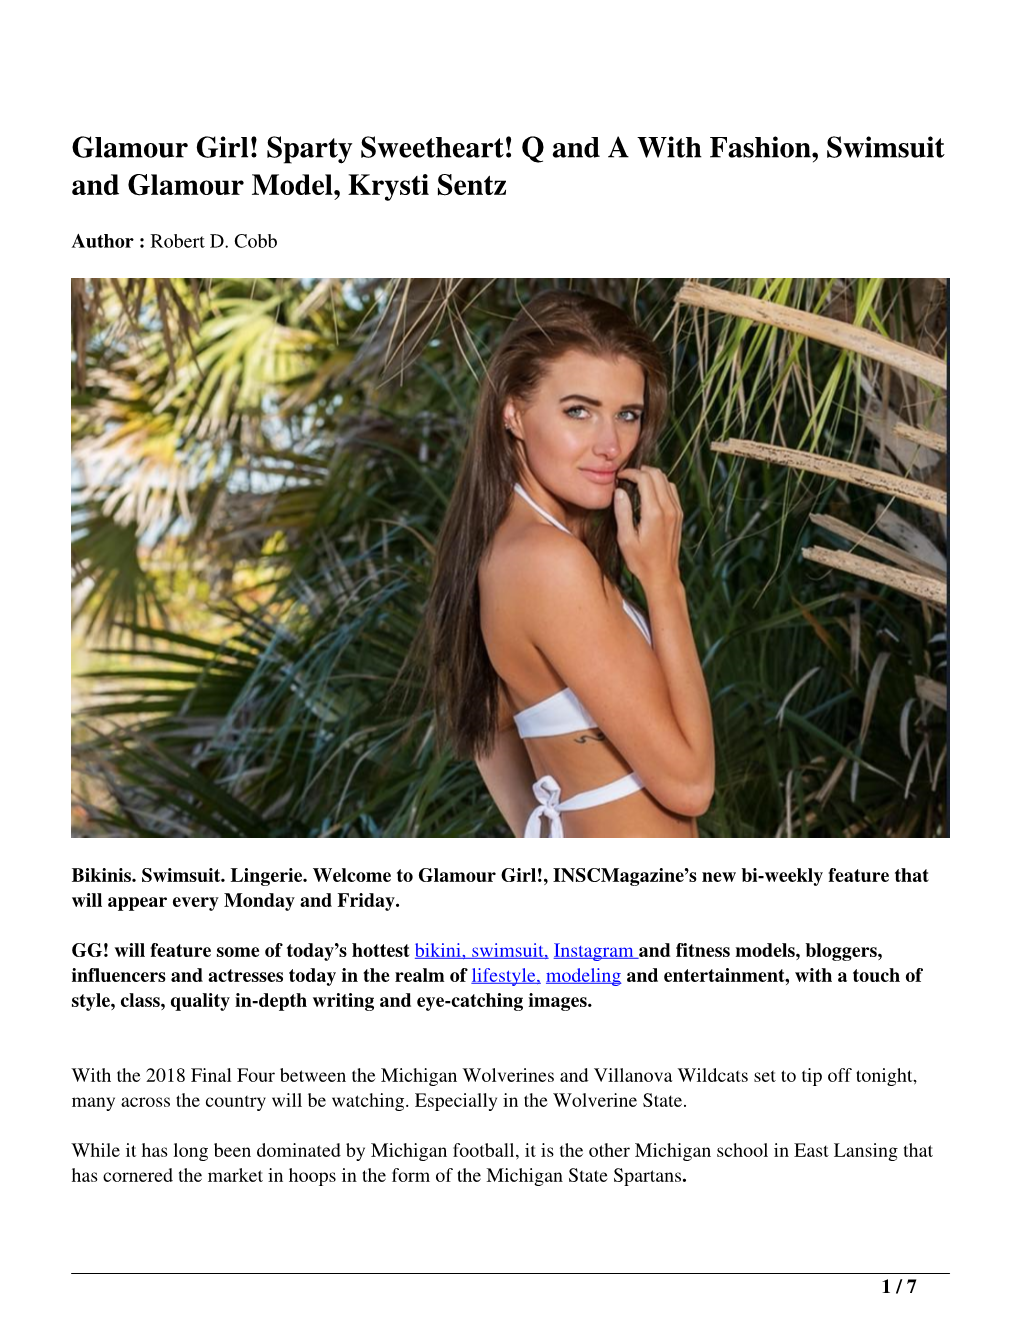 Glamour Girl! Sparty Sweetheart! Q and a with Fashion, Swimsuit and Glamour Model, Krysti Sentz